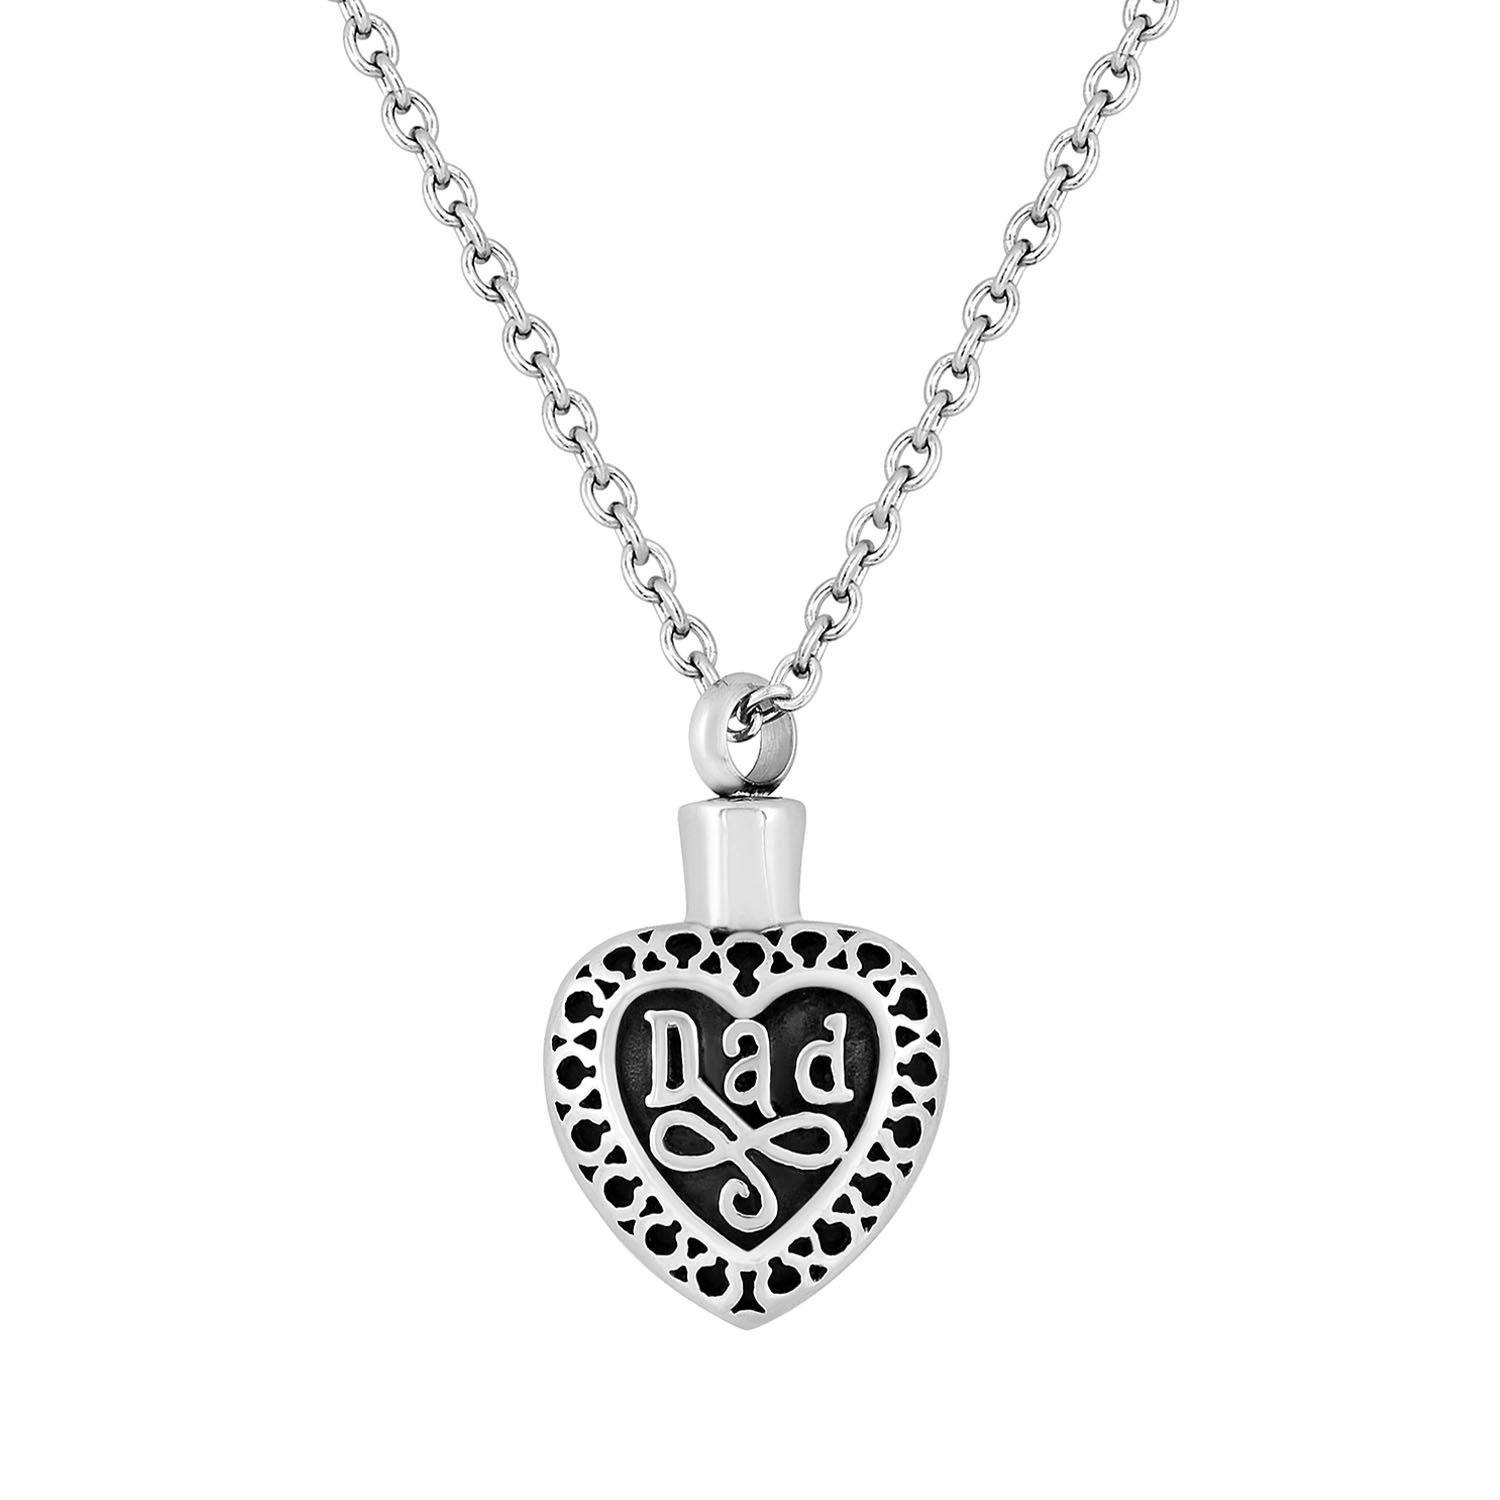 Cremation Jewelry Necklace for Ashes - Dad Heart